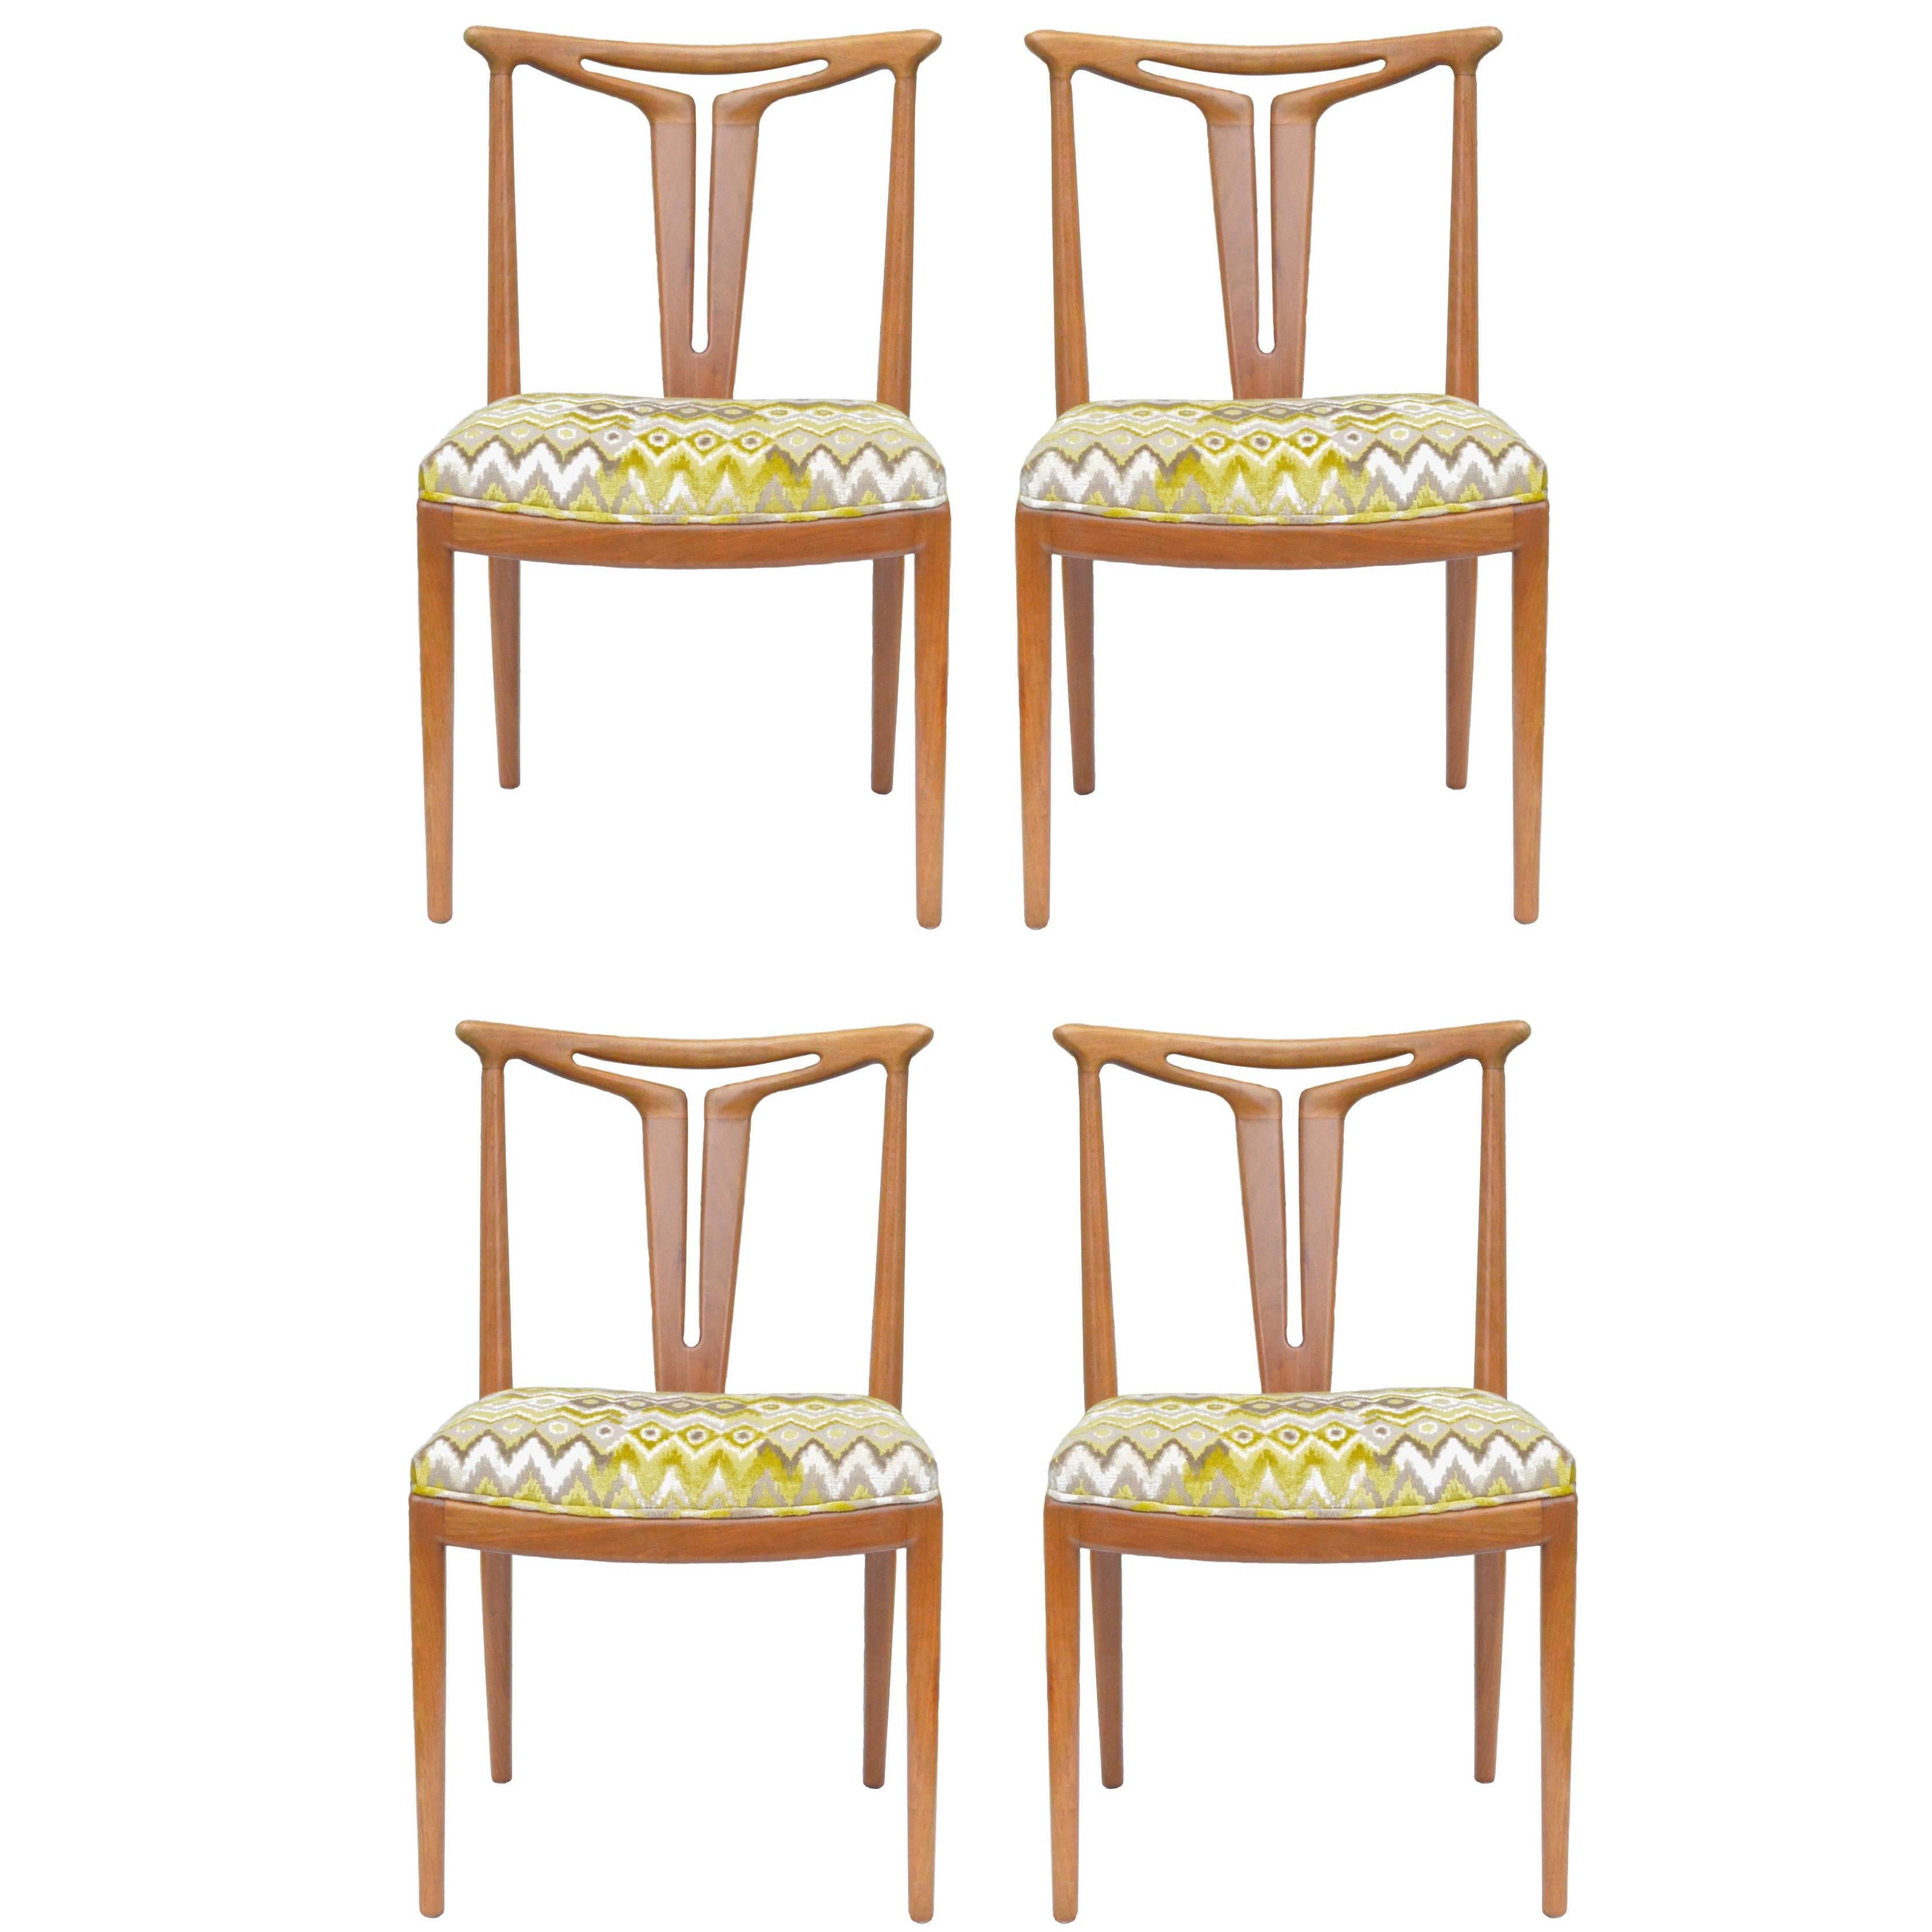 Gorgeous set of four modern dining chairs of walnut having very unique "T" back splats. The chairs have just been dressed up in a chic ikat fabric by Kravet Couture. All chairs very sturdy and tight having recently been gone over, they are